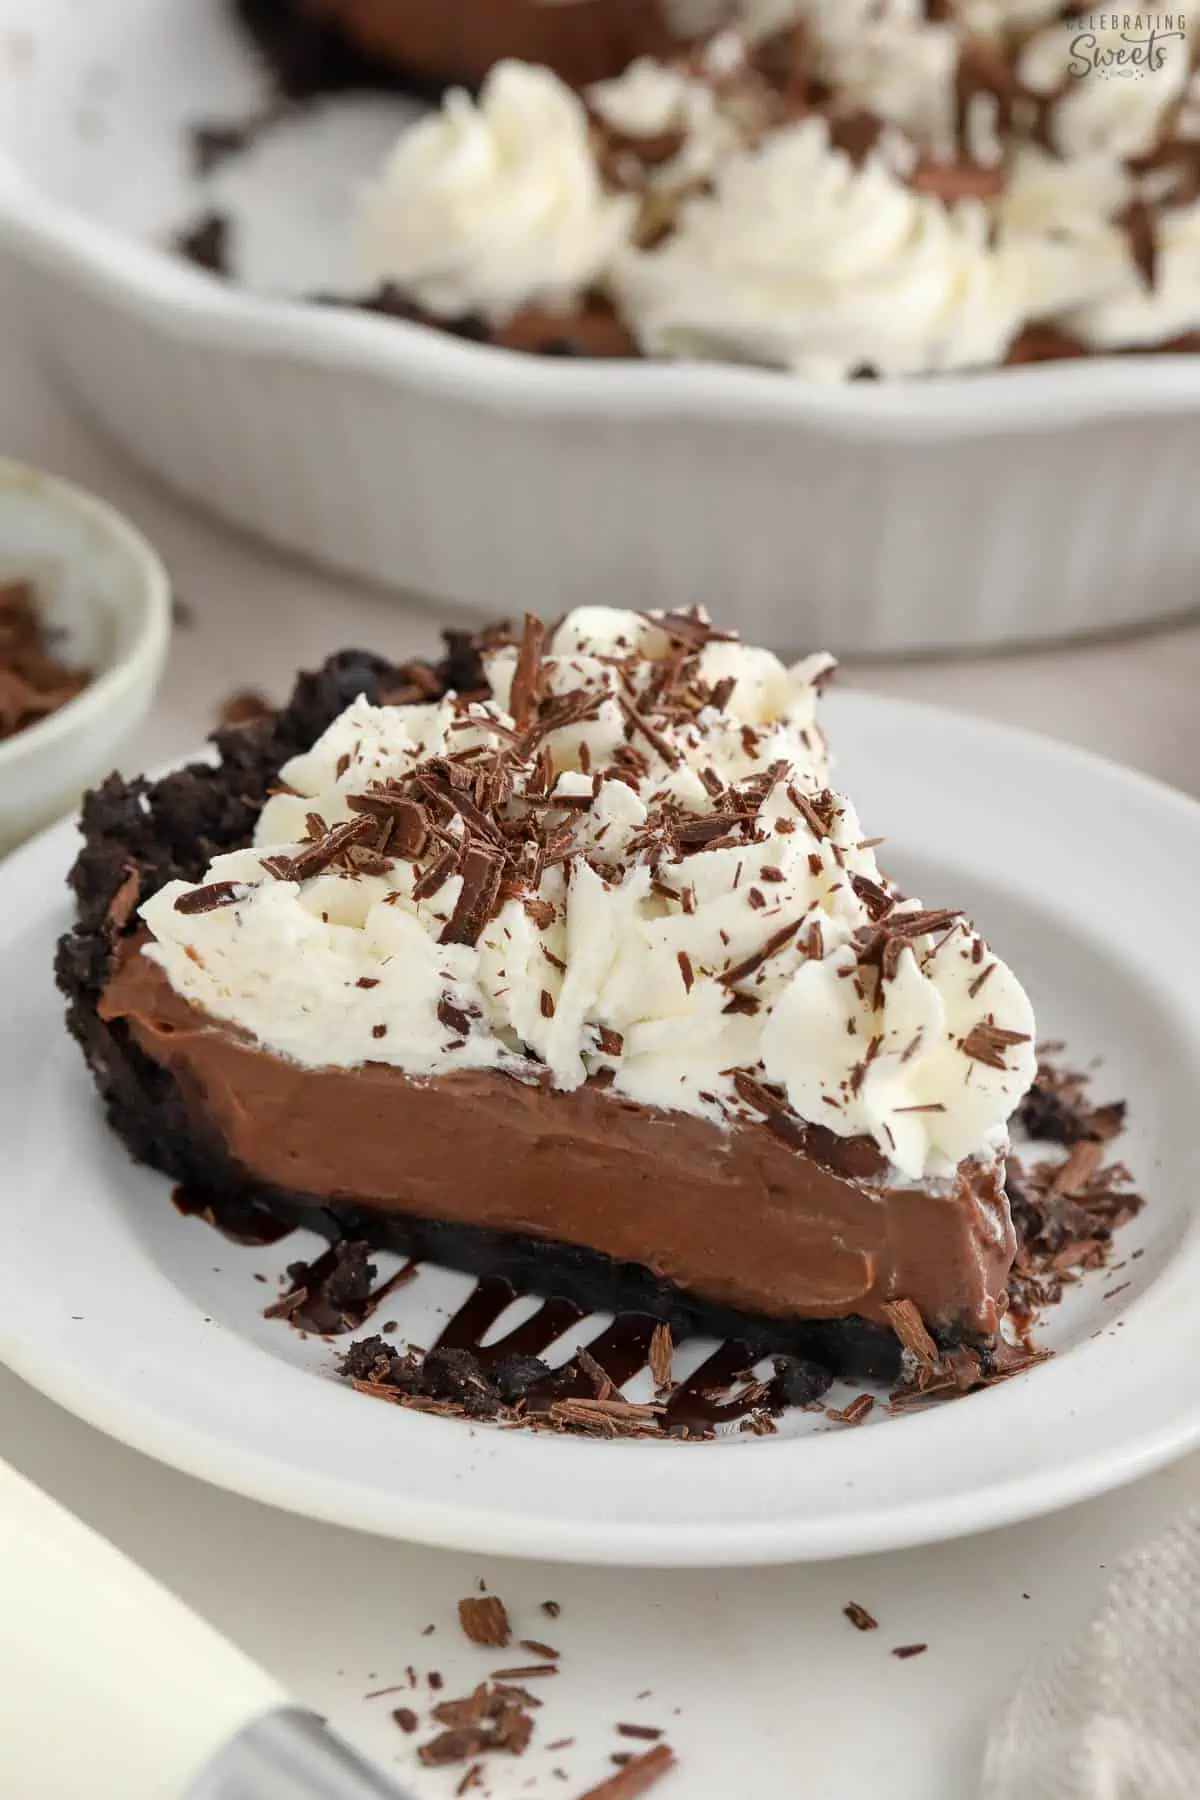 Slice of chocolate pie on a white plate topped with chocolate shavings.